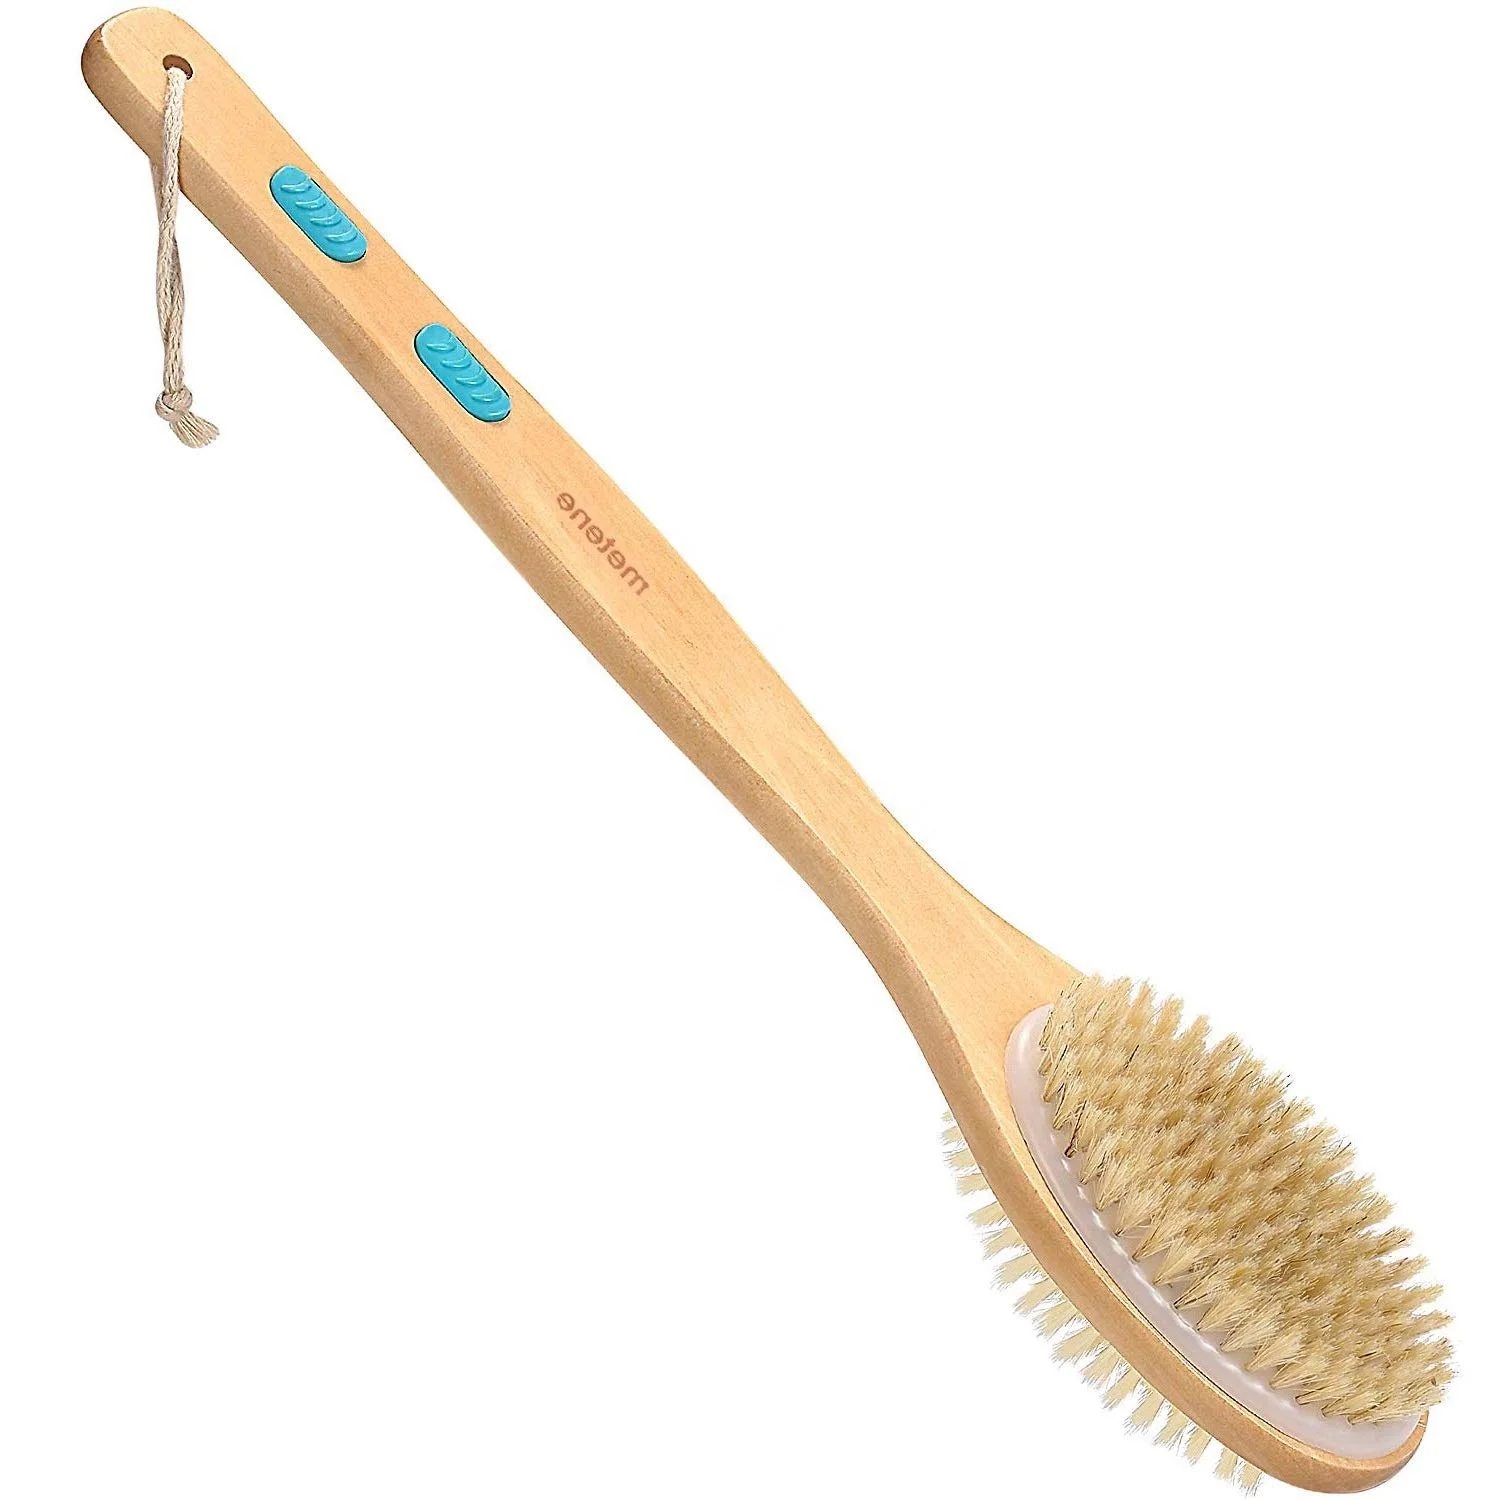 

Long Wooden Handle Dry or Wet Skin Shower Back Cleaning Exfoliator Brush with Soft and Stiff Bristles Back Washer for Men Women, Customized color